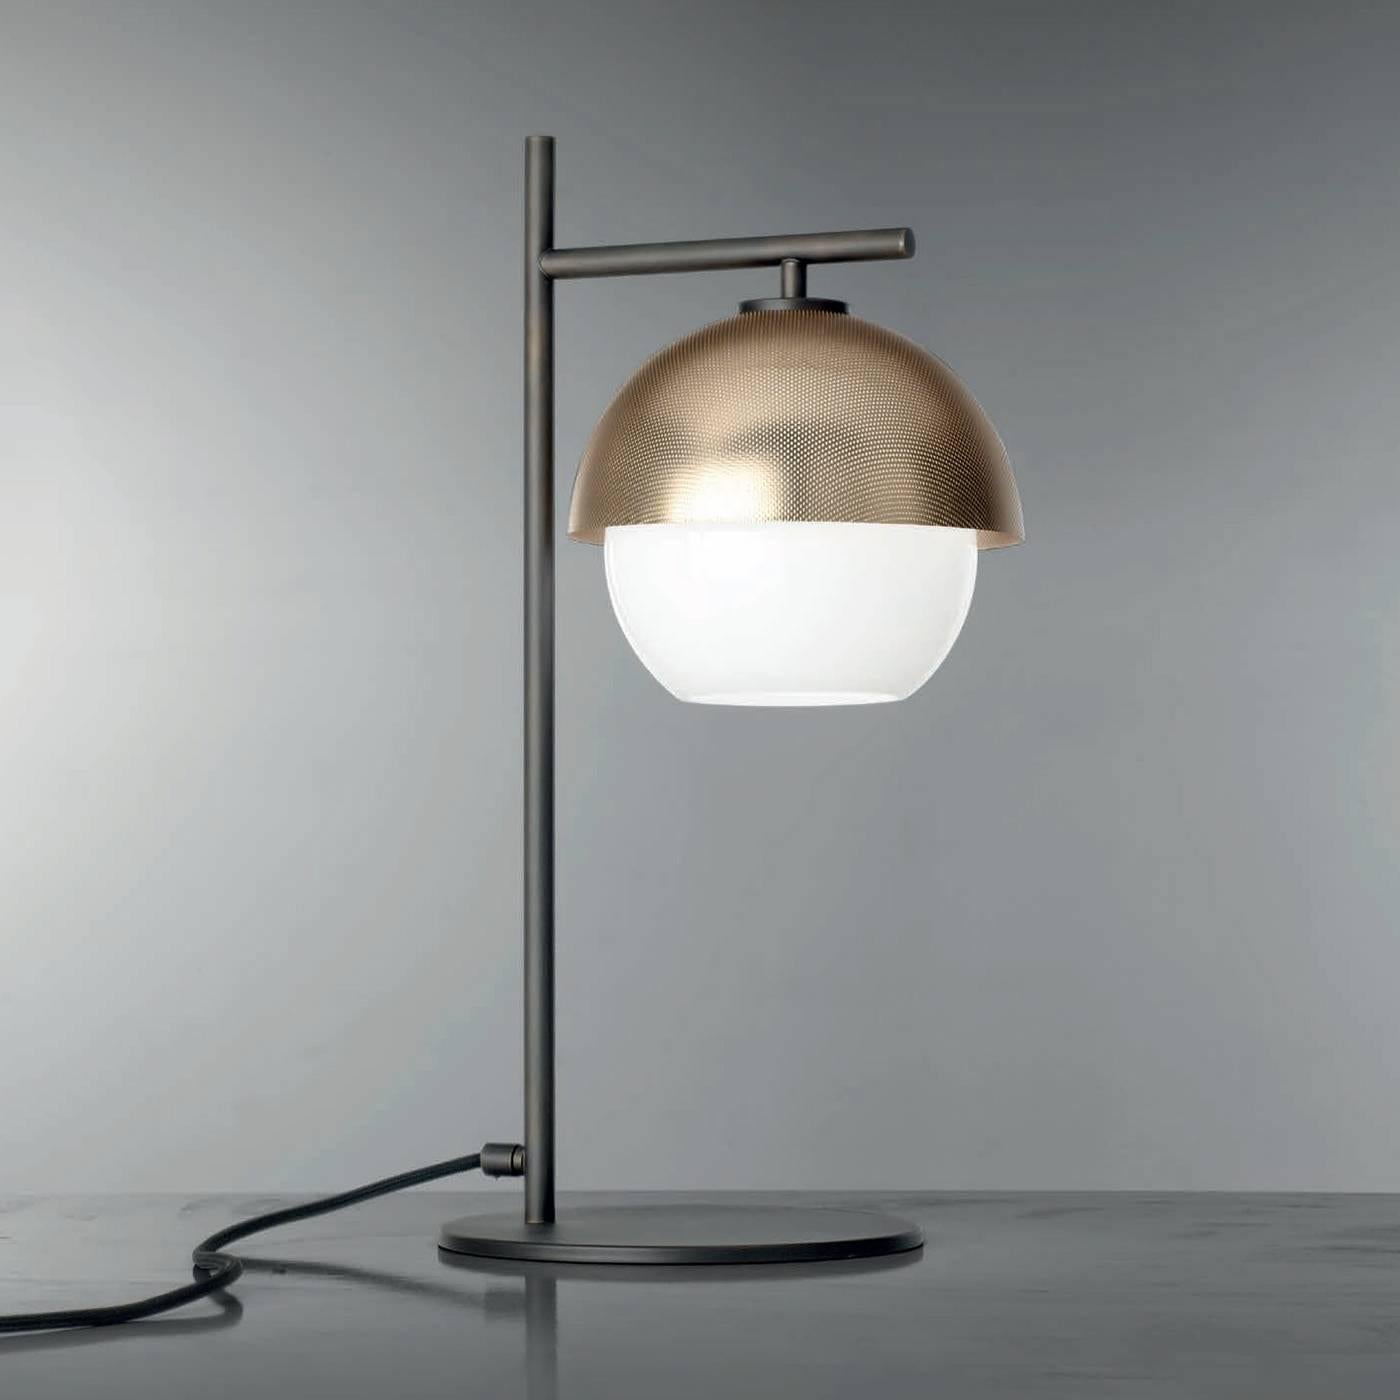 This elegant table lamp is an exquisite balance of straight and round lines. The spherical white Murano mouth-blown glass diffuser screens the light making it soft and relaxing. The semi-spherical metal shade can have a matte black or a matte golden